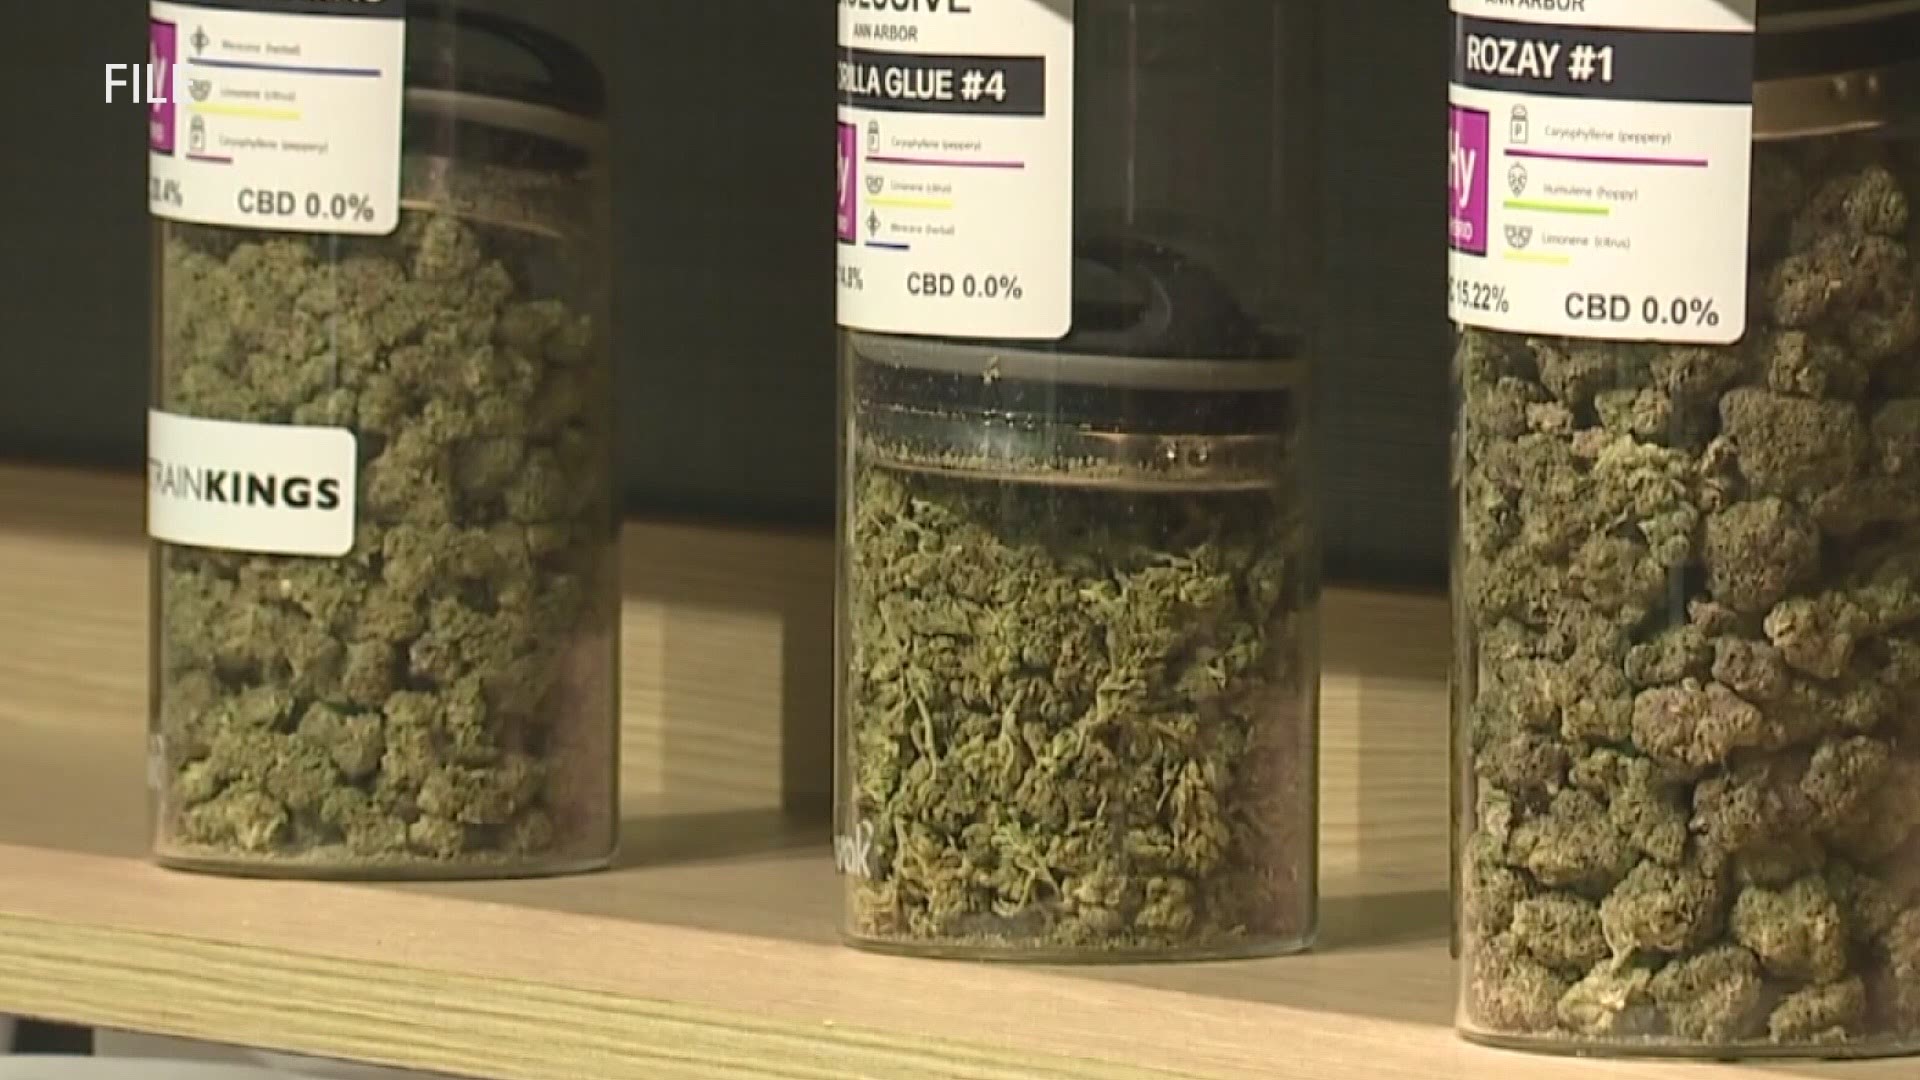 The City of Muskegon Heights granted 18 conditional marijuana licenses to 12 investors. City Manager Troy Bells says pot shops could open for business this year.